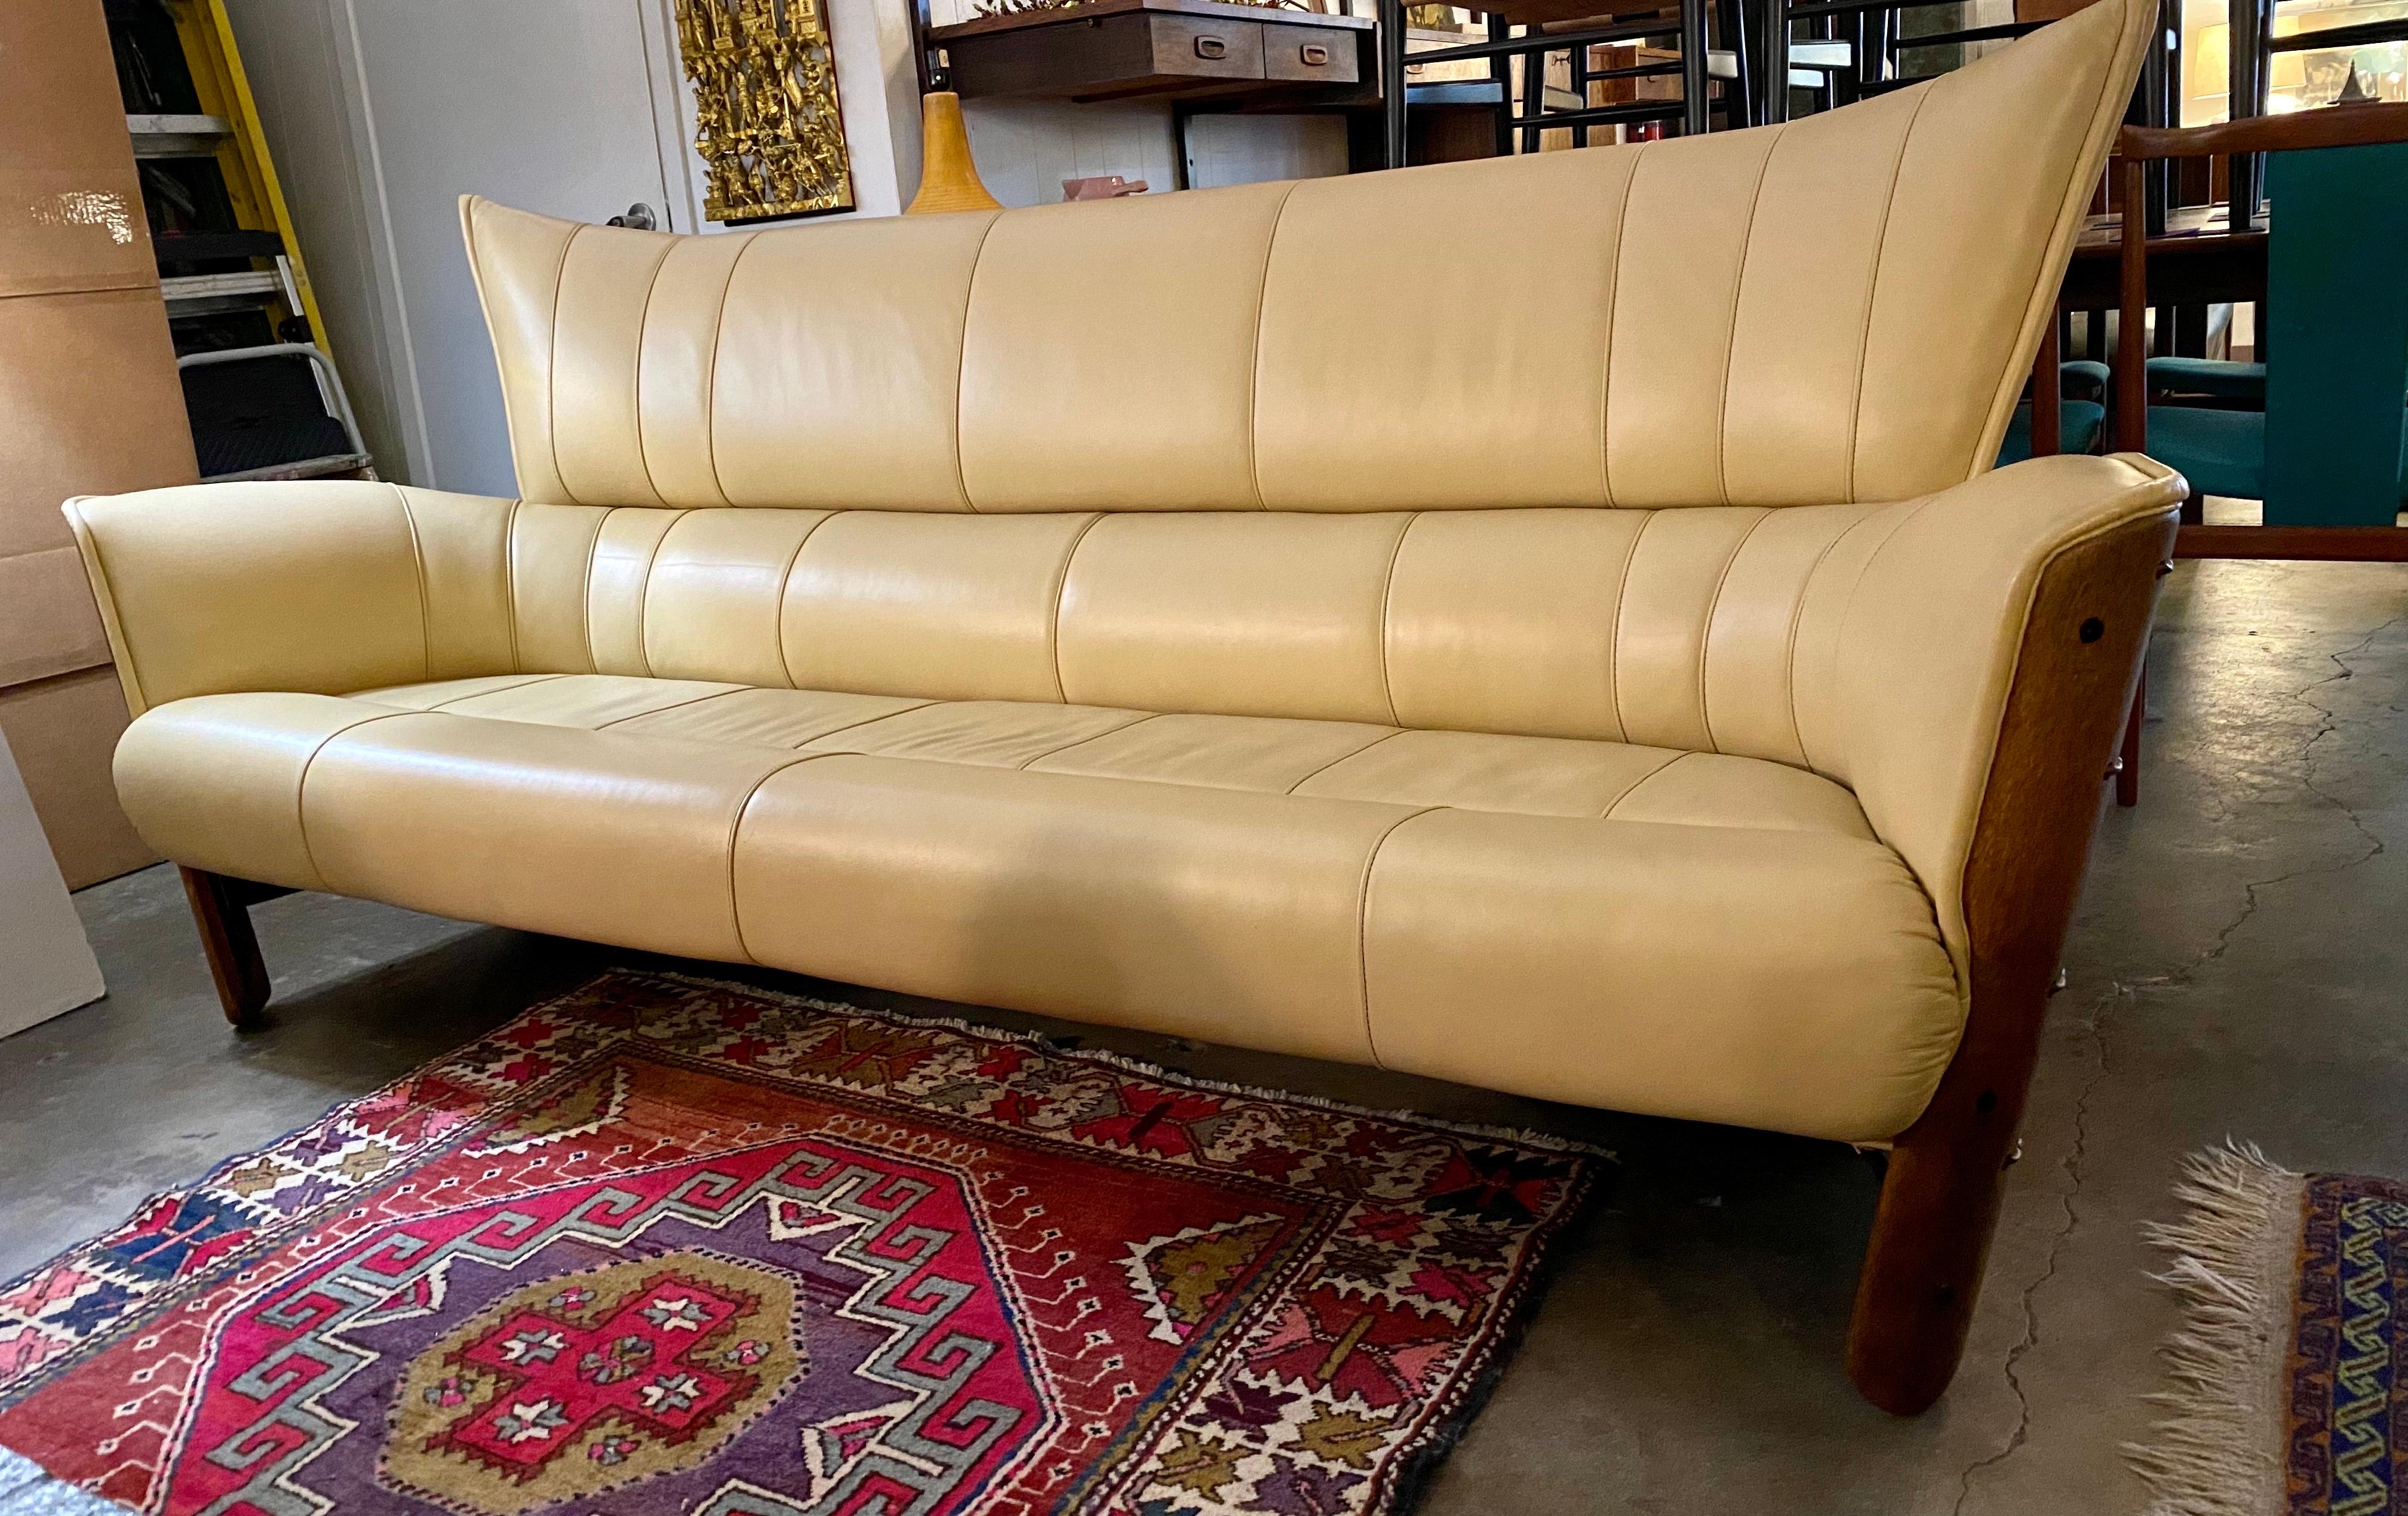 Pacific Green furniture sofa features a beautiful rich texture, a warm tone, and natural materials made of palm wood and leather, Australia, circa 1990s. Dimensions: 87.50